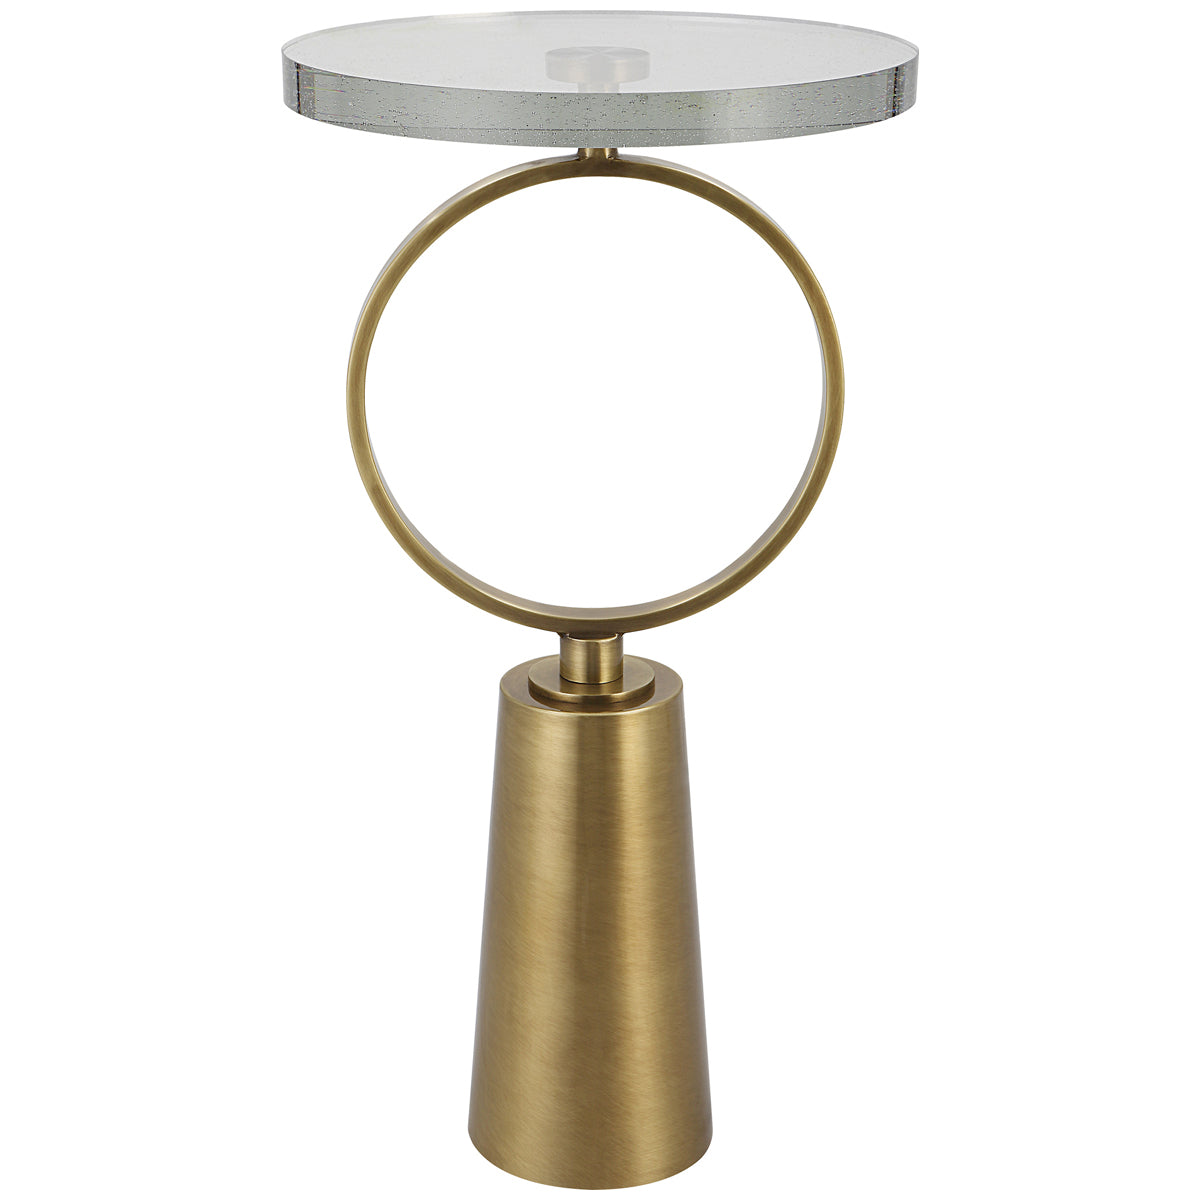 Uttermost Ringlet Brass Accent Table